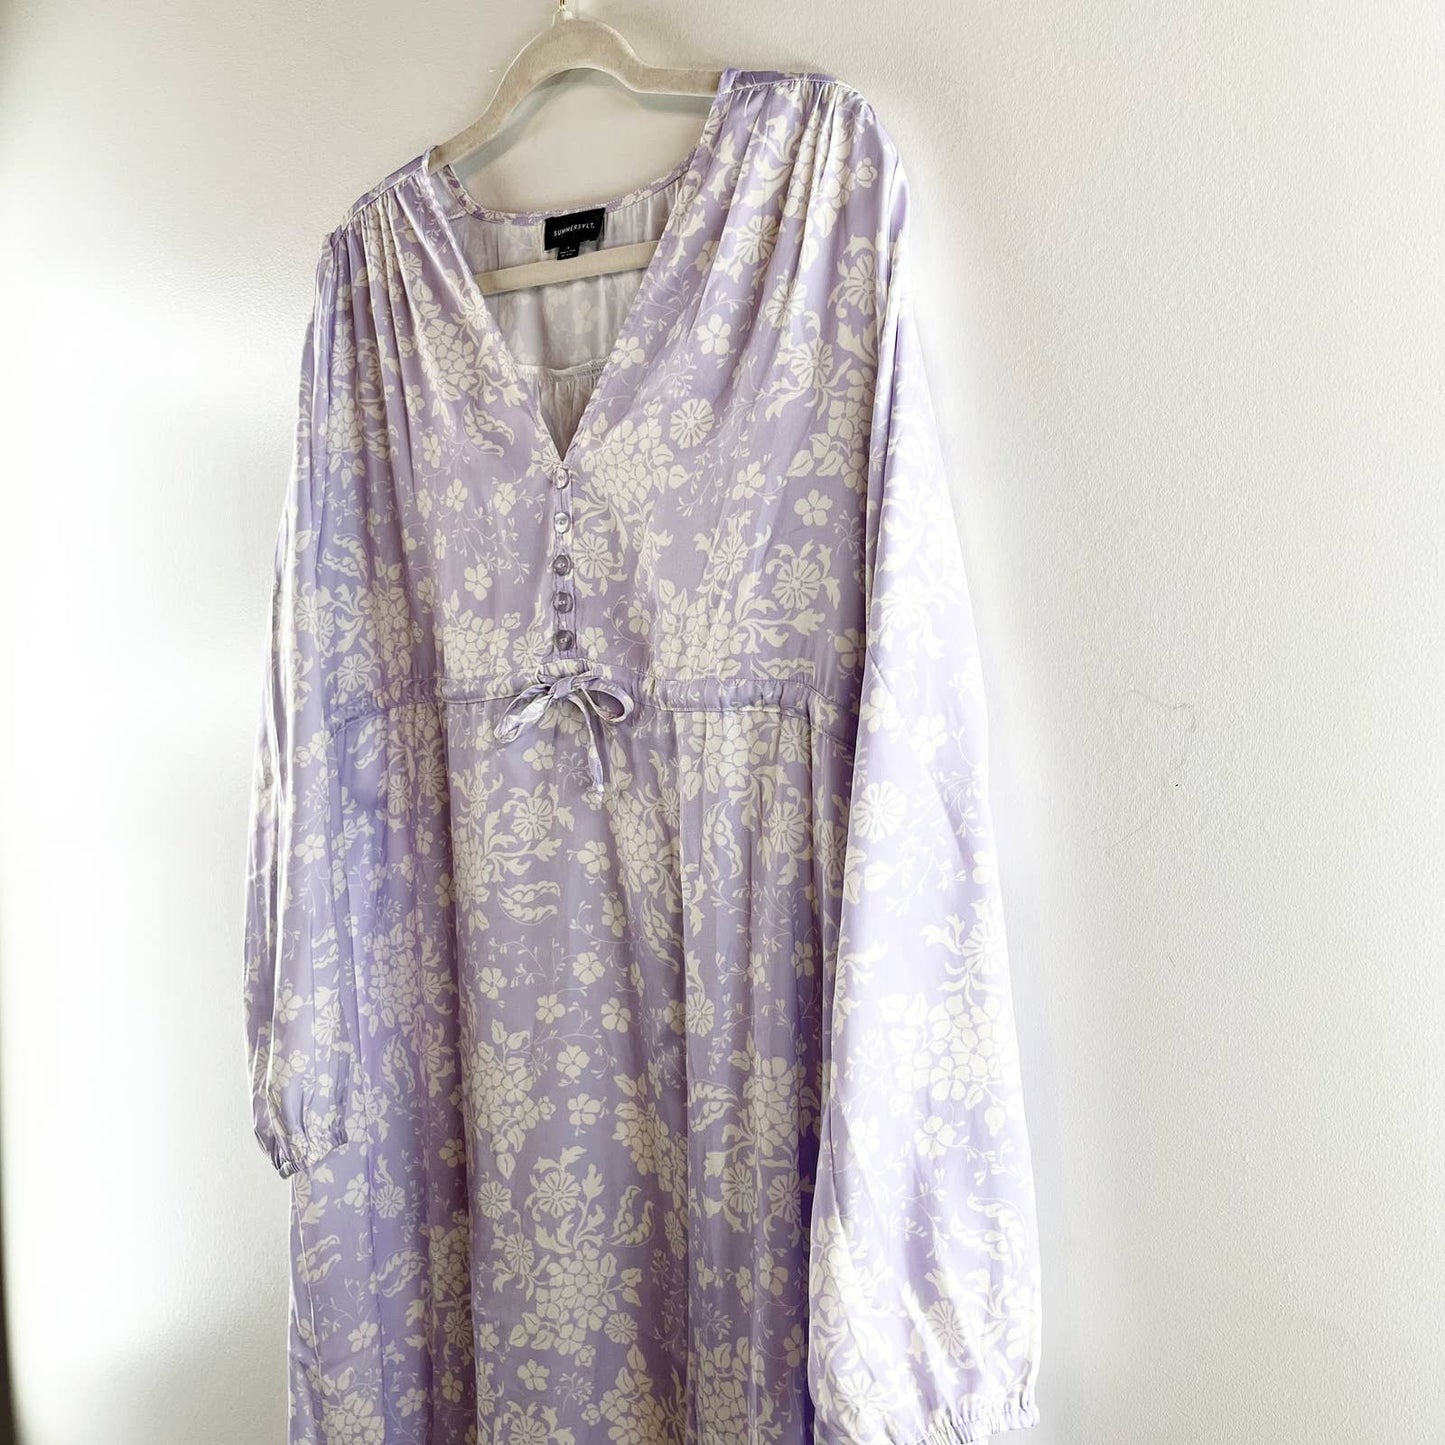 Summersalt The Cinched Waist Caftan Dress in Vintage Floral Lavender Small NWT